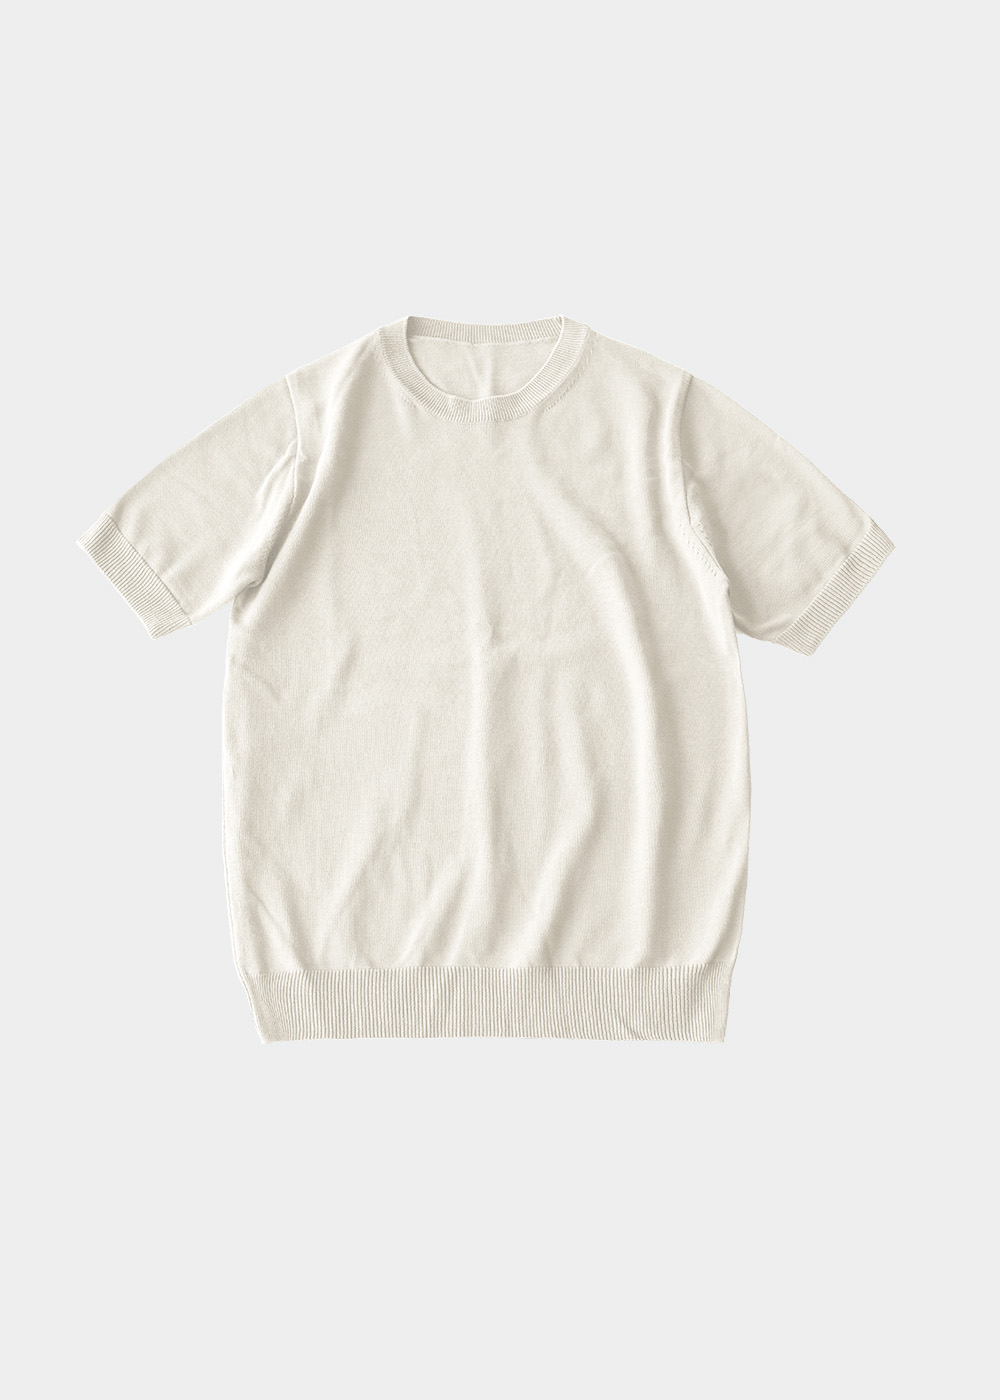 Low Density Cotton Blended High Twisted Short Sleeve Crewneck Knit _ cream